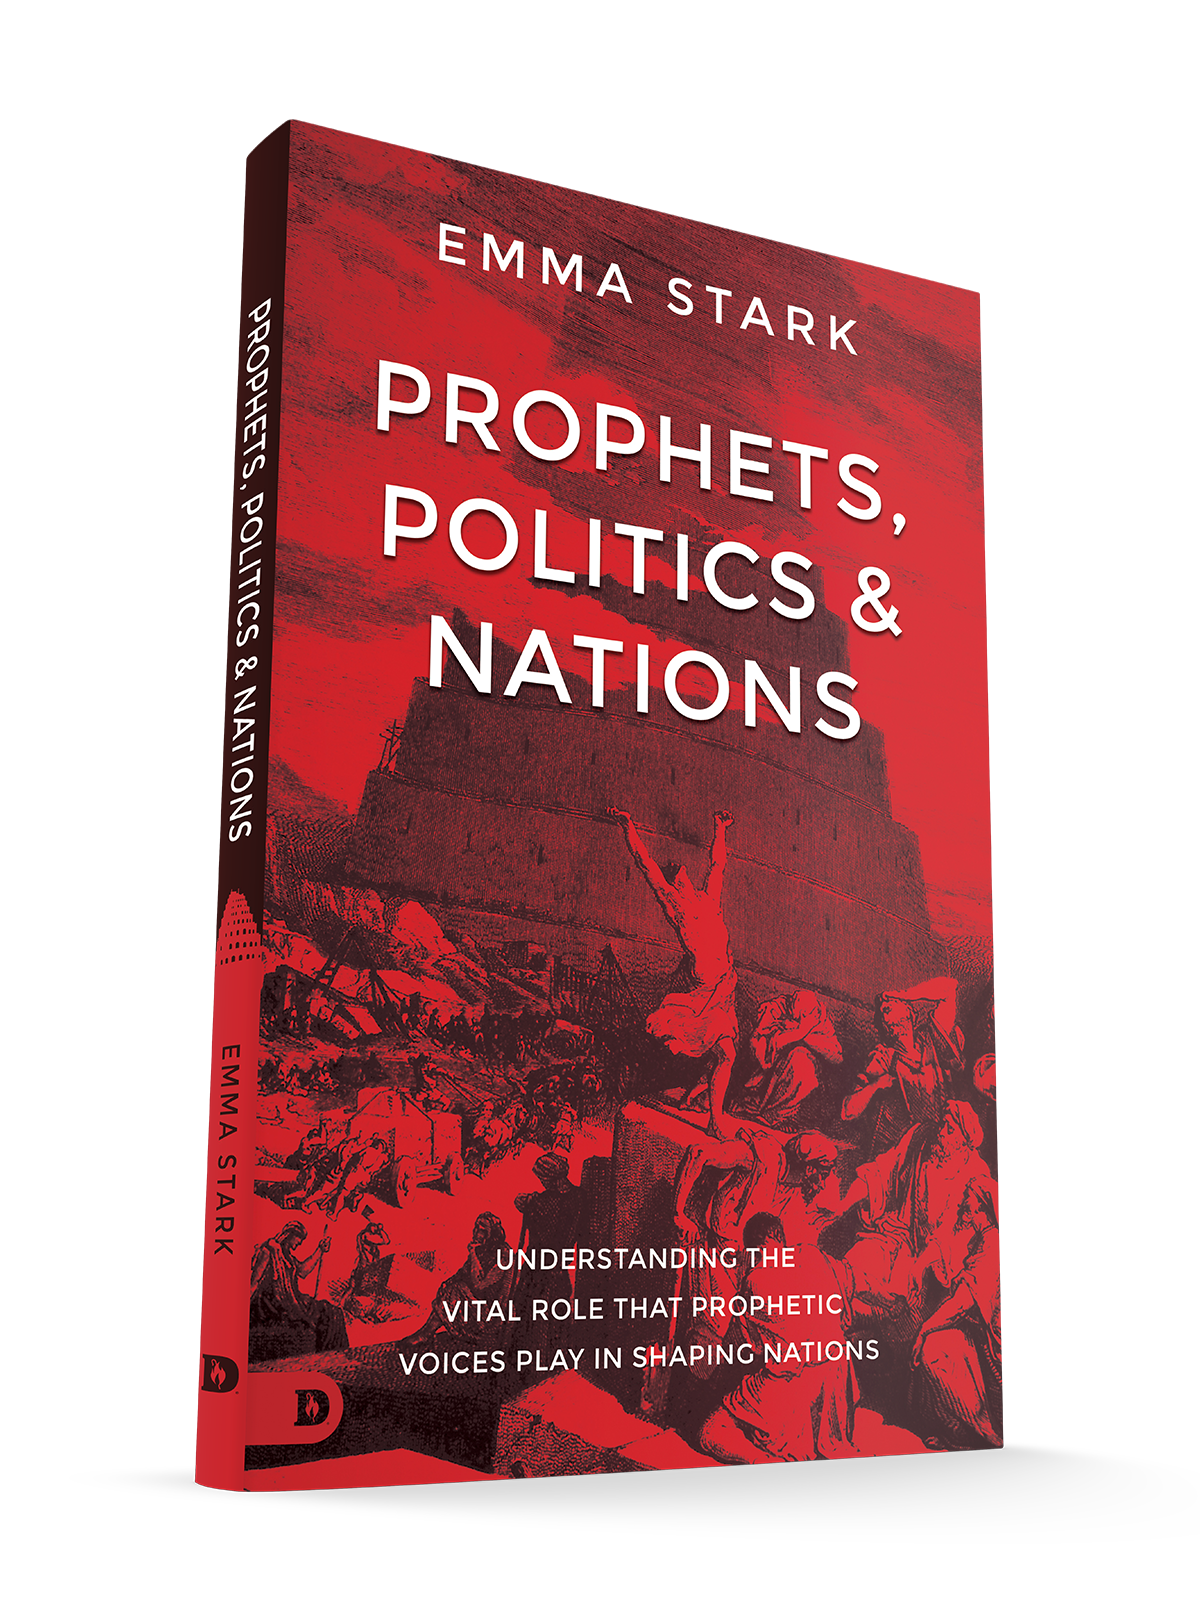 Prophets, Politics and Nations: Understanding the Vital Role that Prophetic Voices Play in Shaping Nations Paperback – August 6, 2024